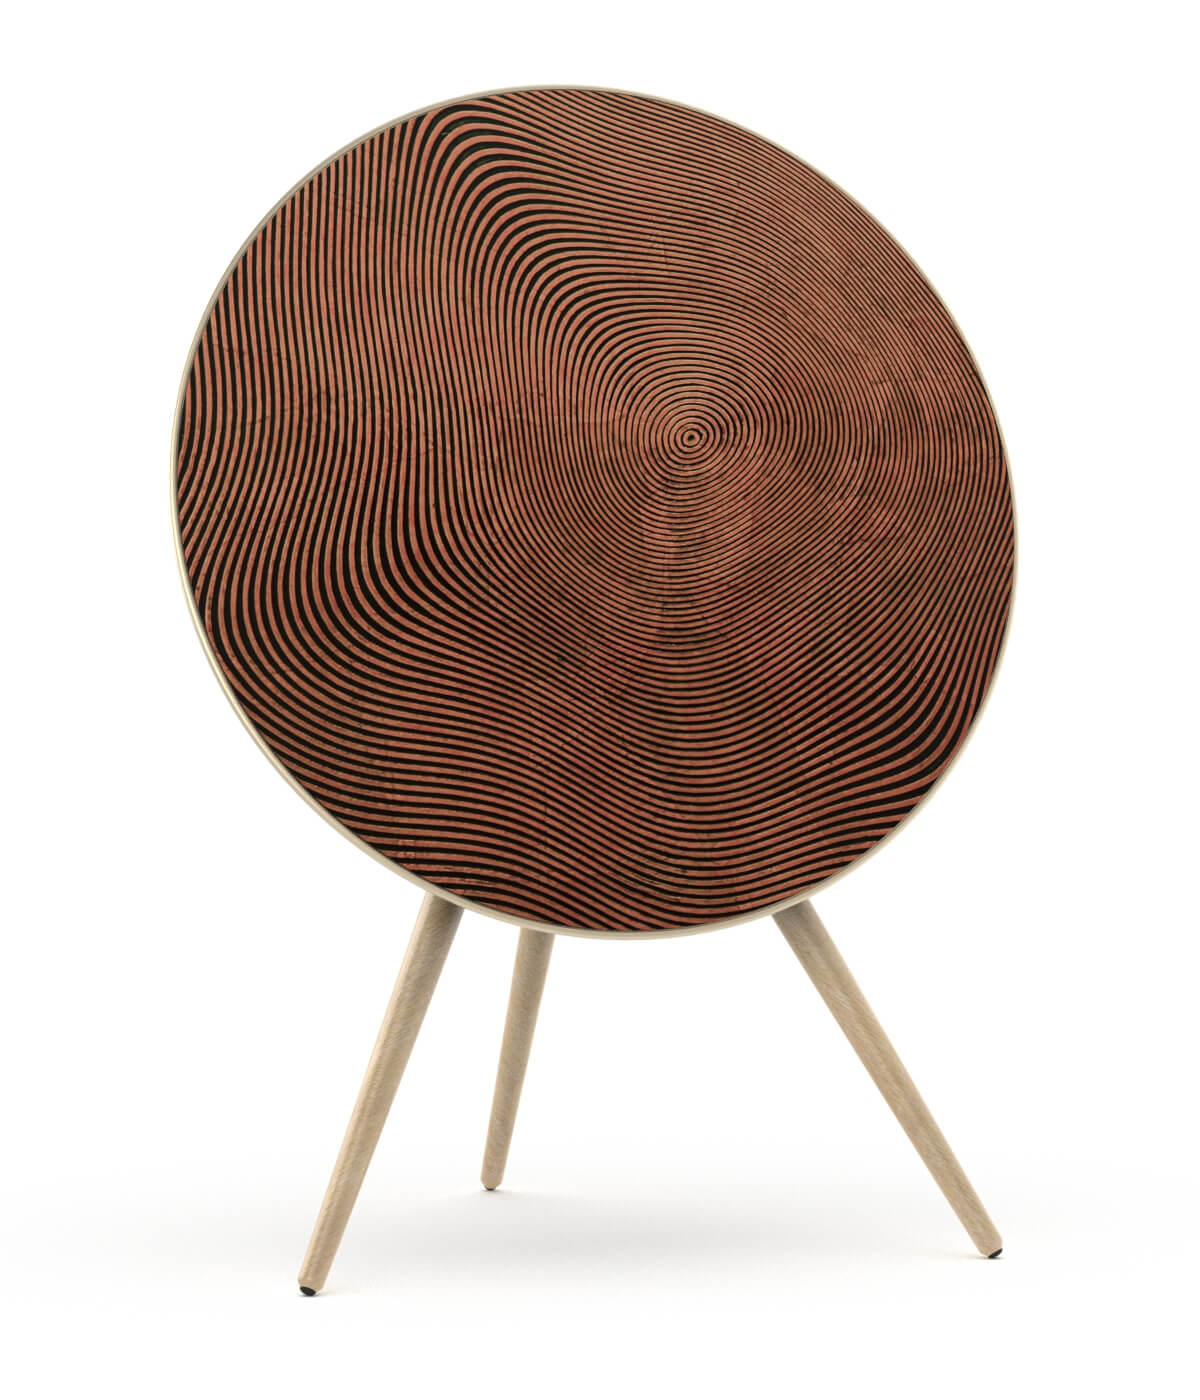 Skiniplay cover Hout for Bang & Olufsen Beoplay A9 and Beosound A9 speaker